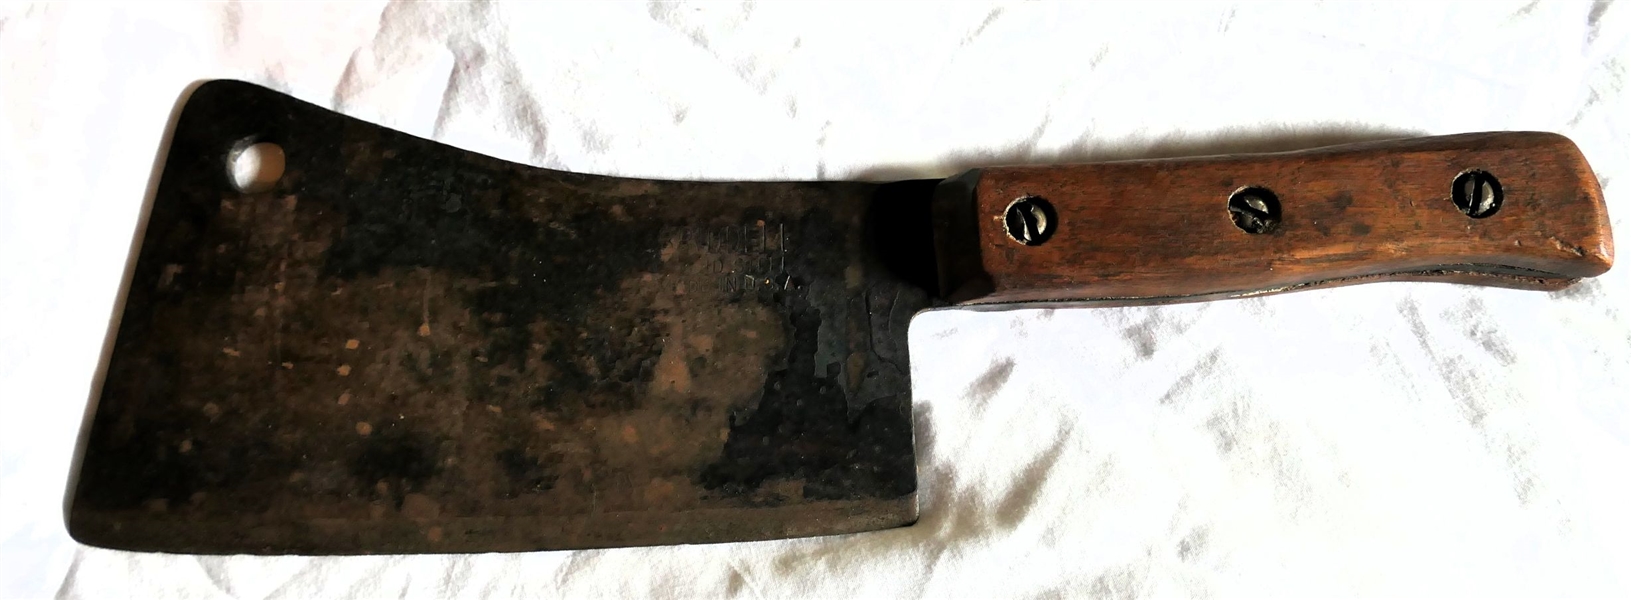 Briddell - Made in USA Meat Cleaver - Measuring 14" Long 4 3/4" At Widest Point